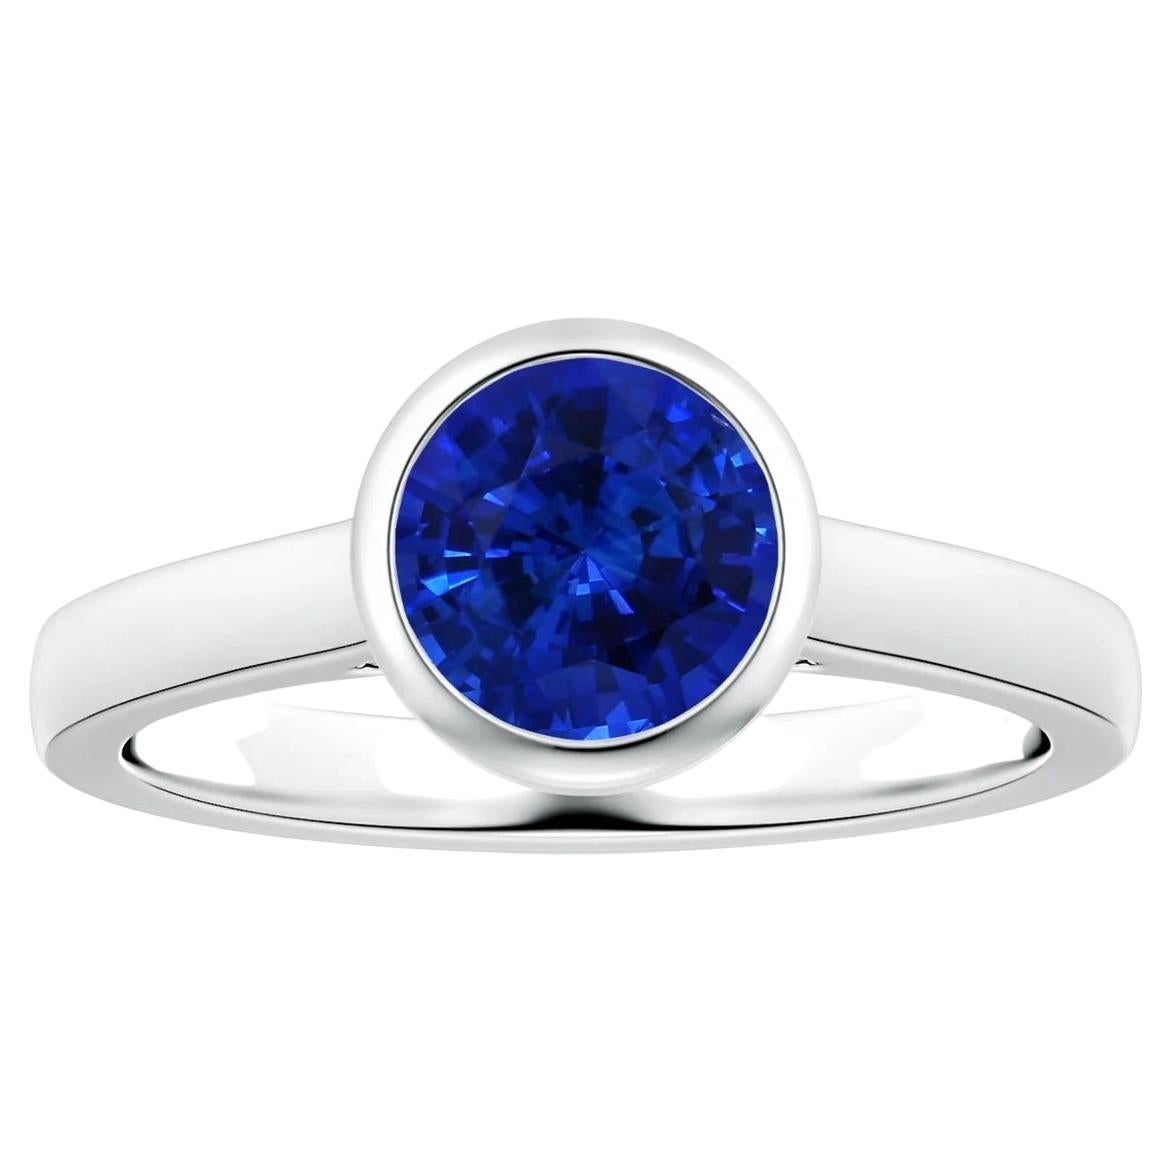 For Sale:  Angara Bezel-Set Gia Certified Round Sapphire Solitaire Ring in White Gold